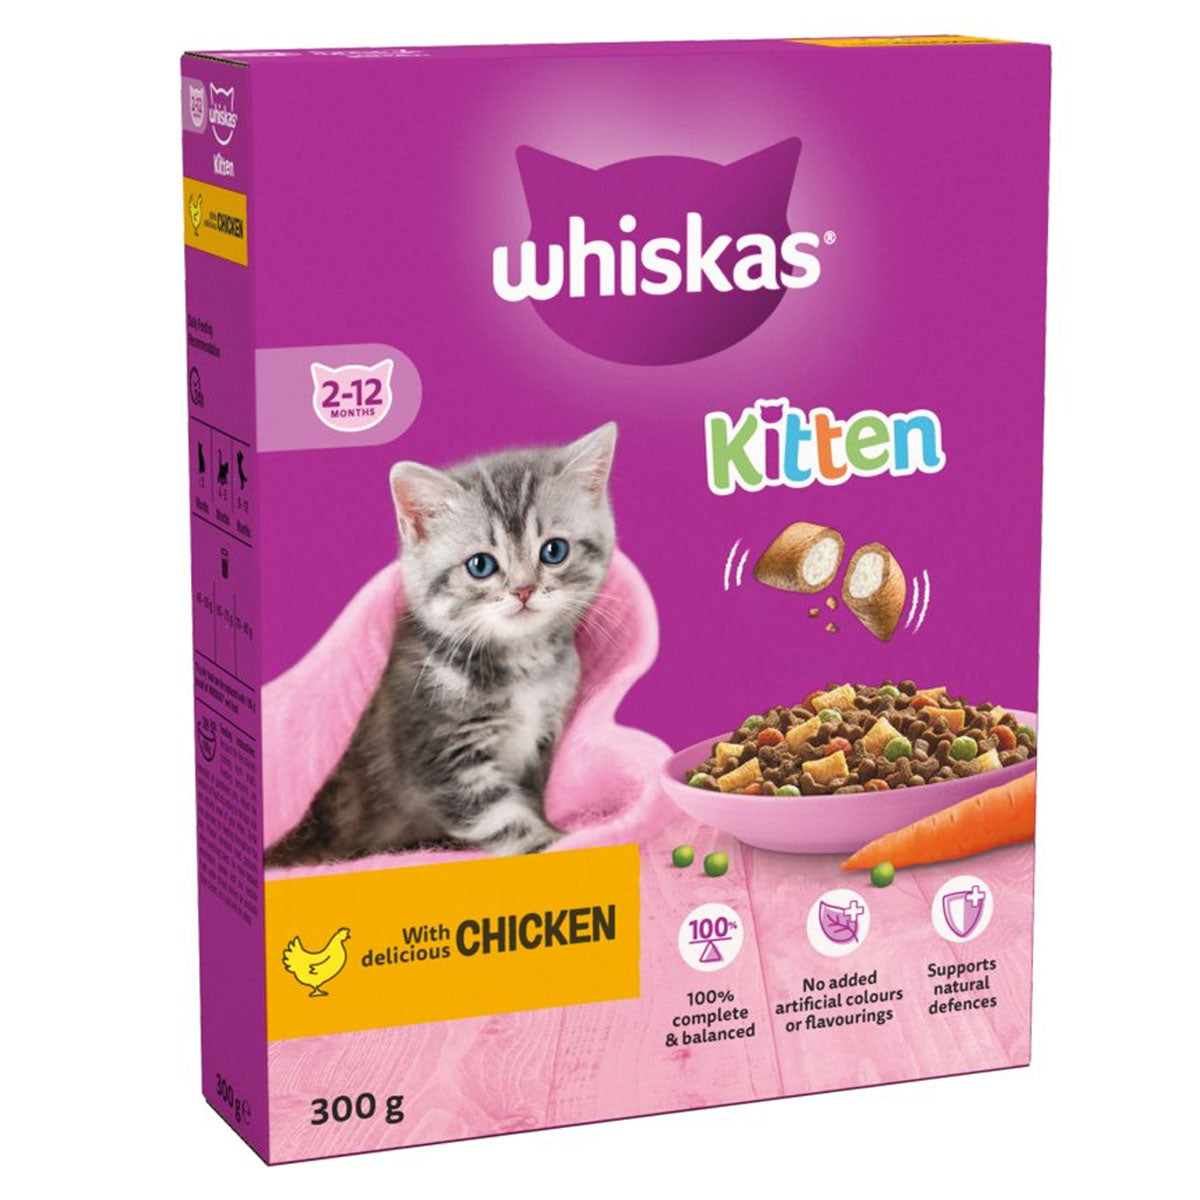 Whiskas - Kitten Dry Food With Chicken - 300g - Continental Food Store